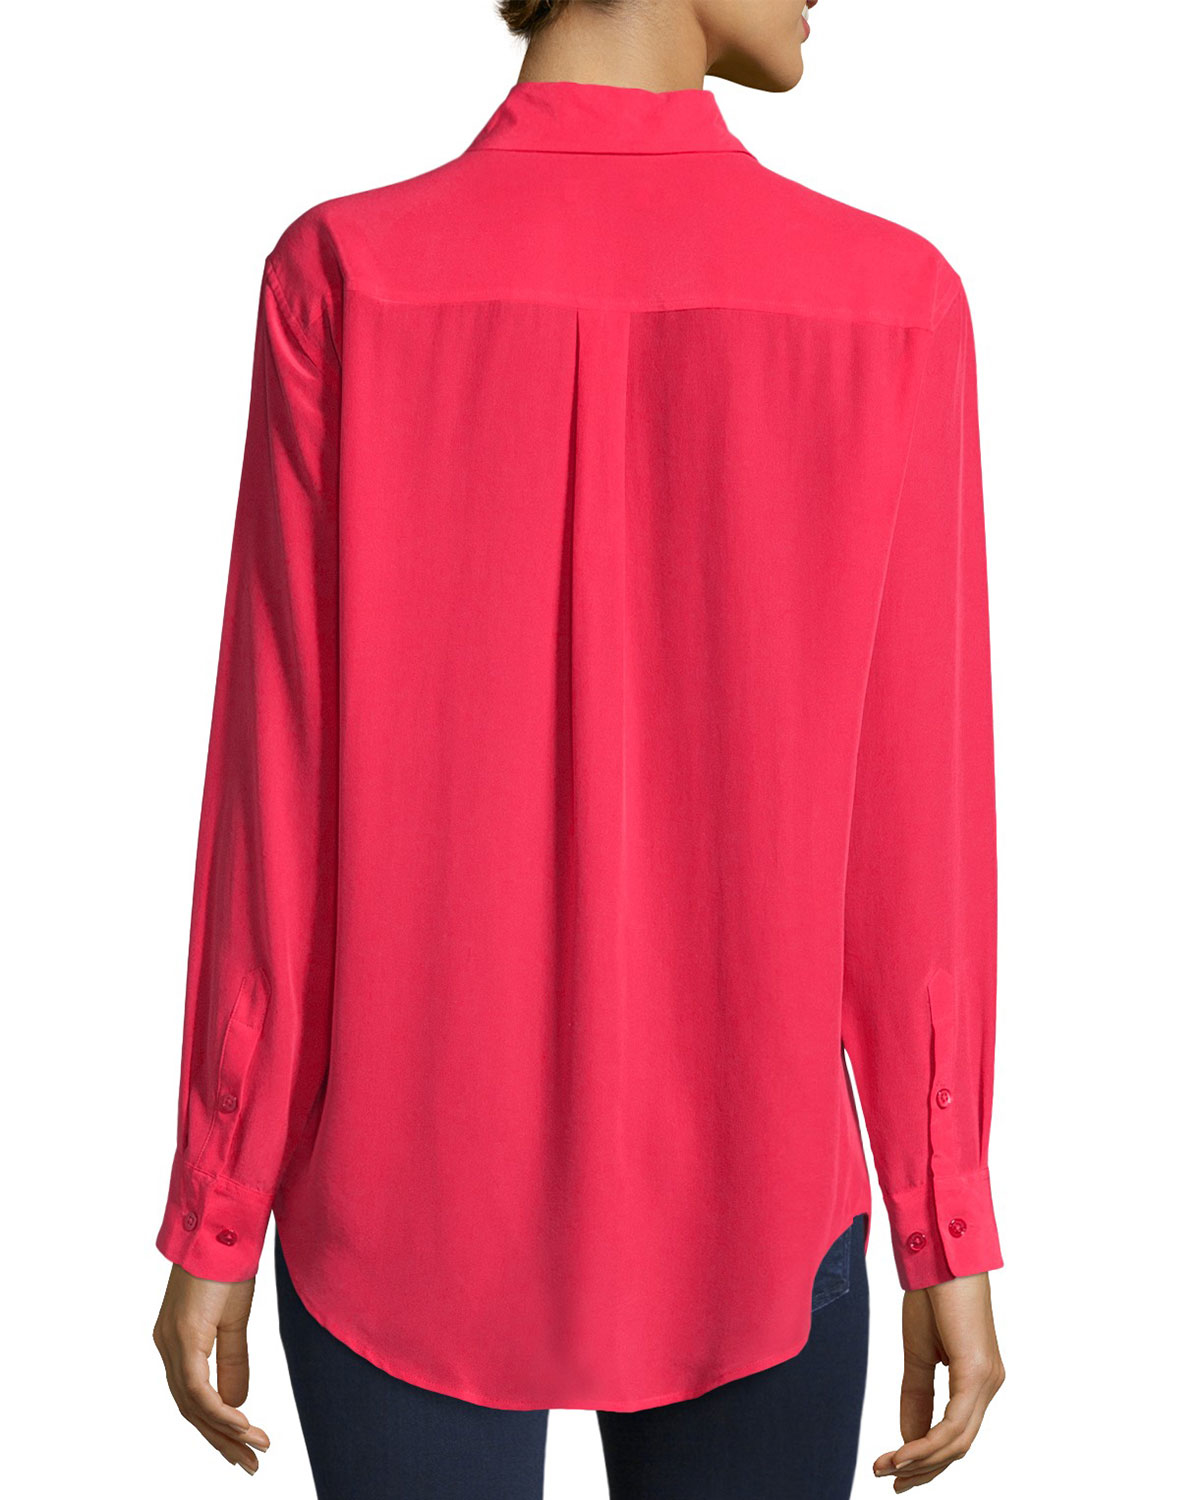 Lyst - Equipment Signature Silk Blouse in Pink